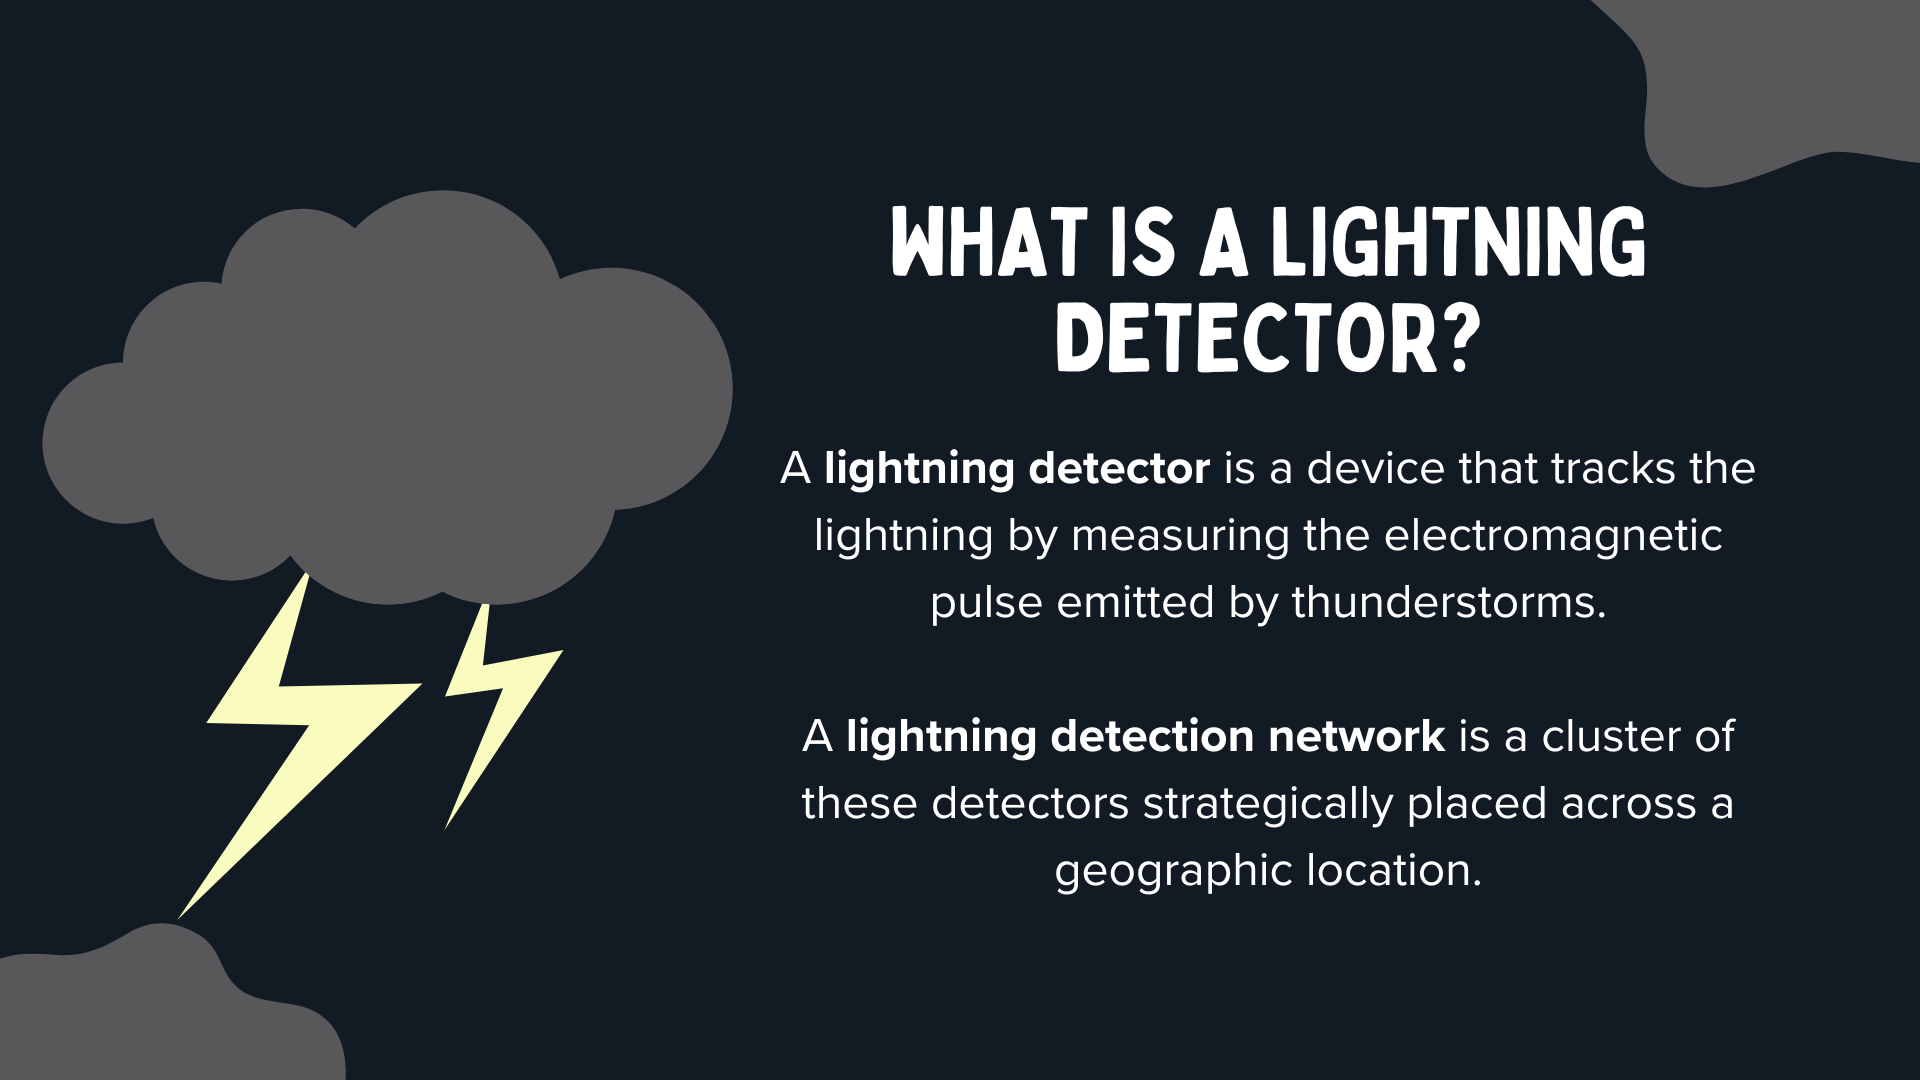 What is a Lightning Detector?